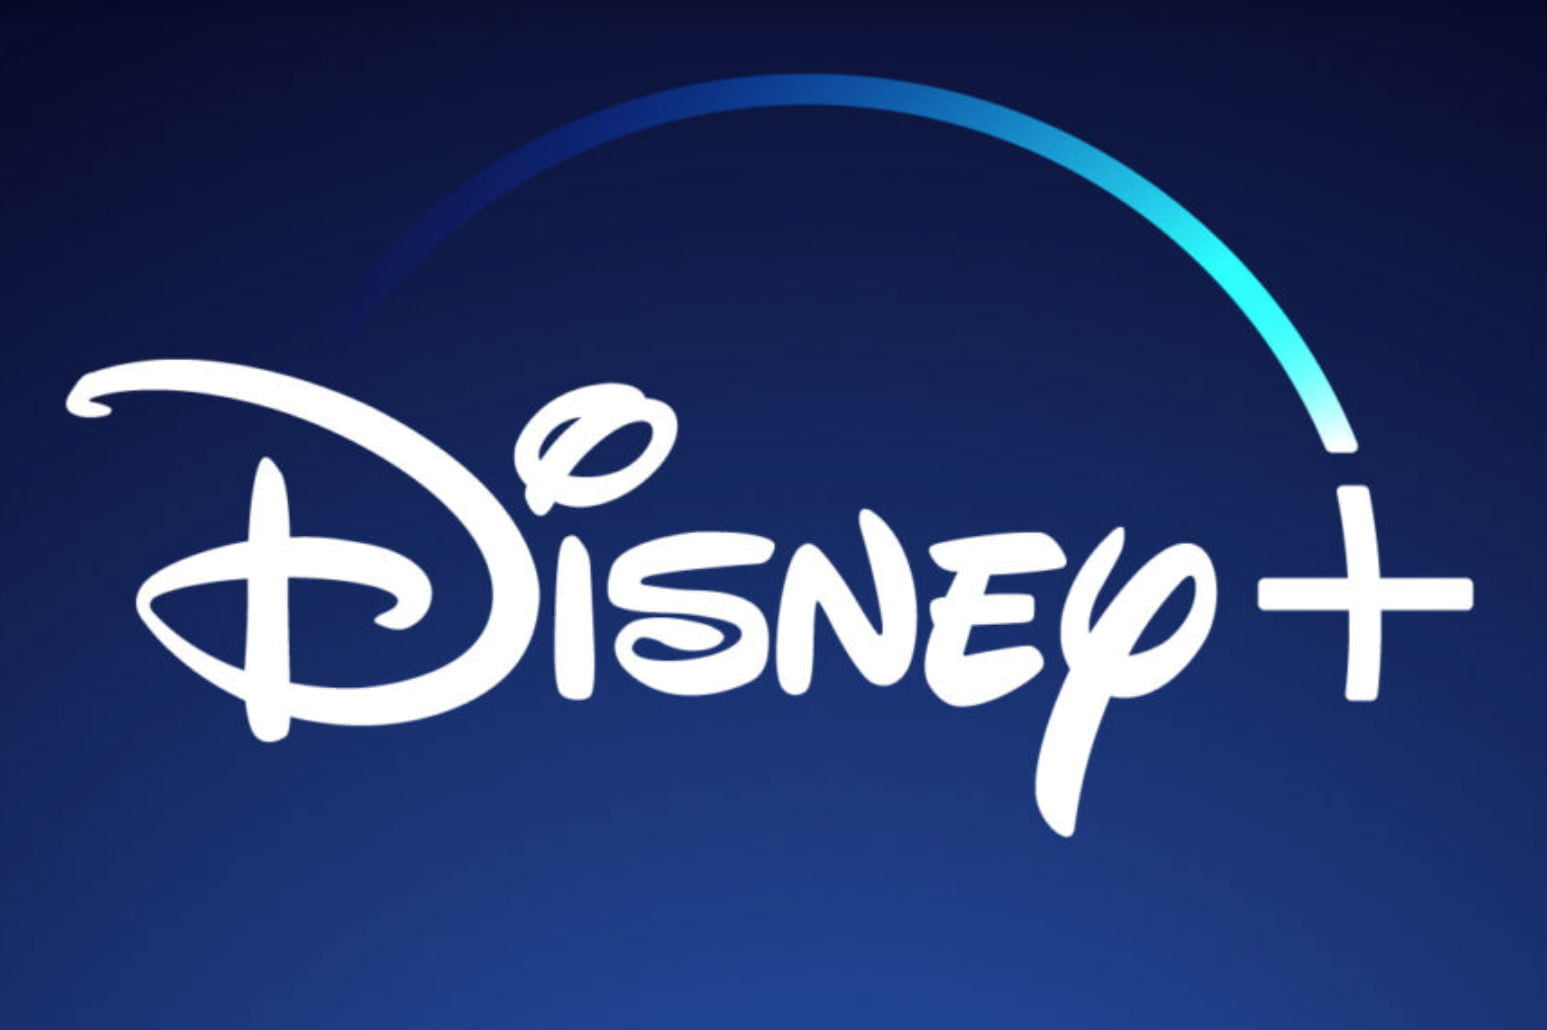 Sadly Disney+ Won’t Work on Chromebooks, Linux, & Some Android Devices Because of DRM